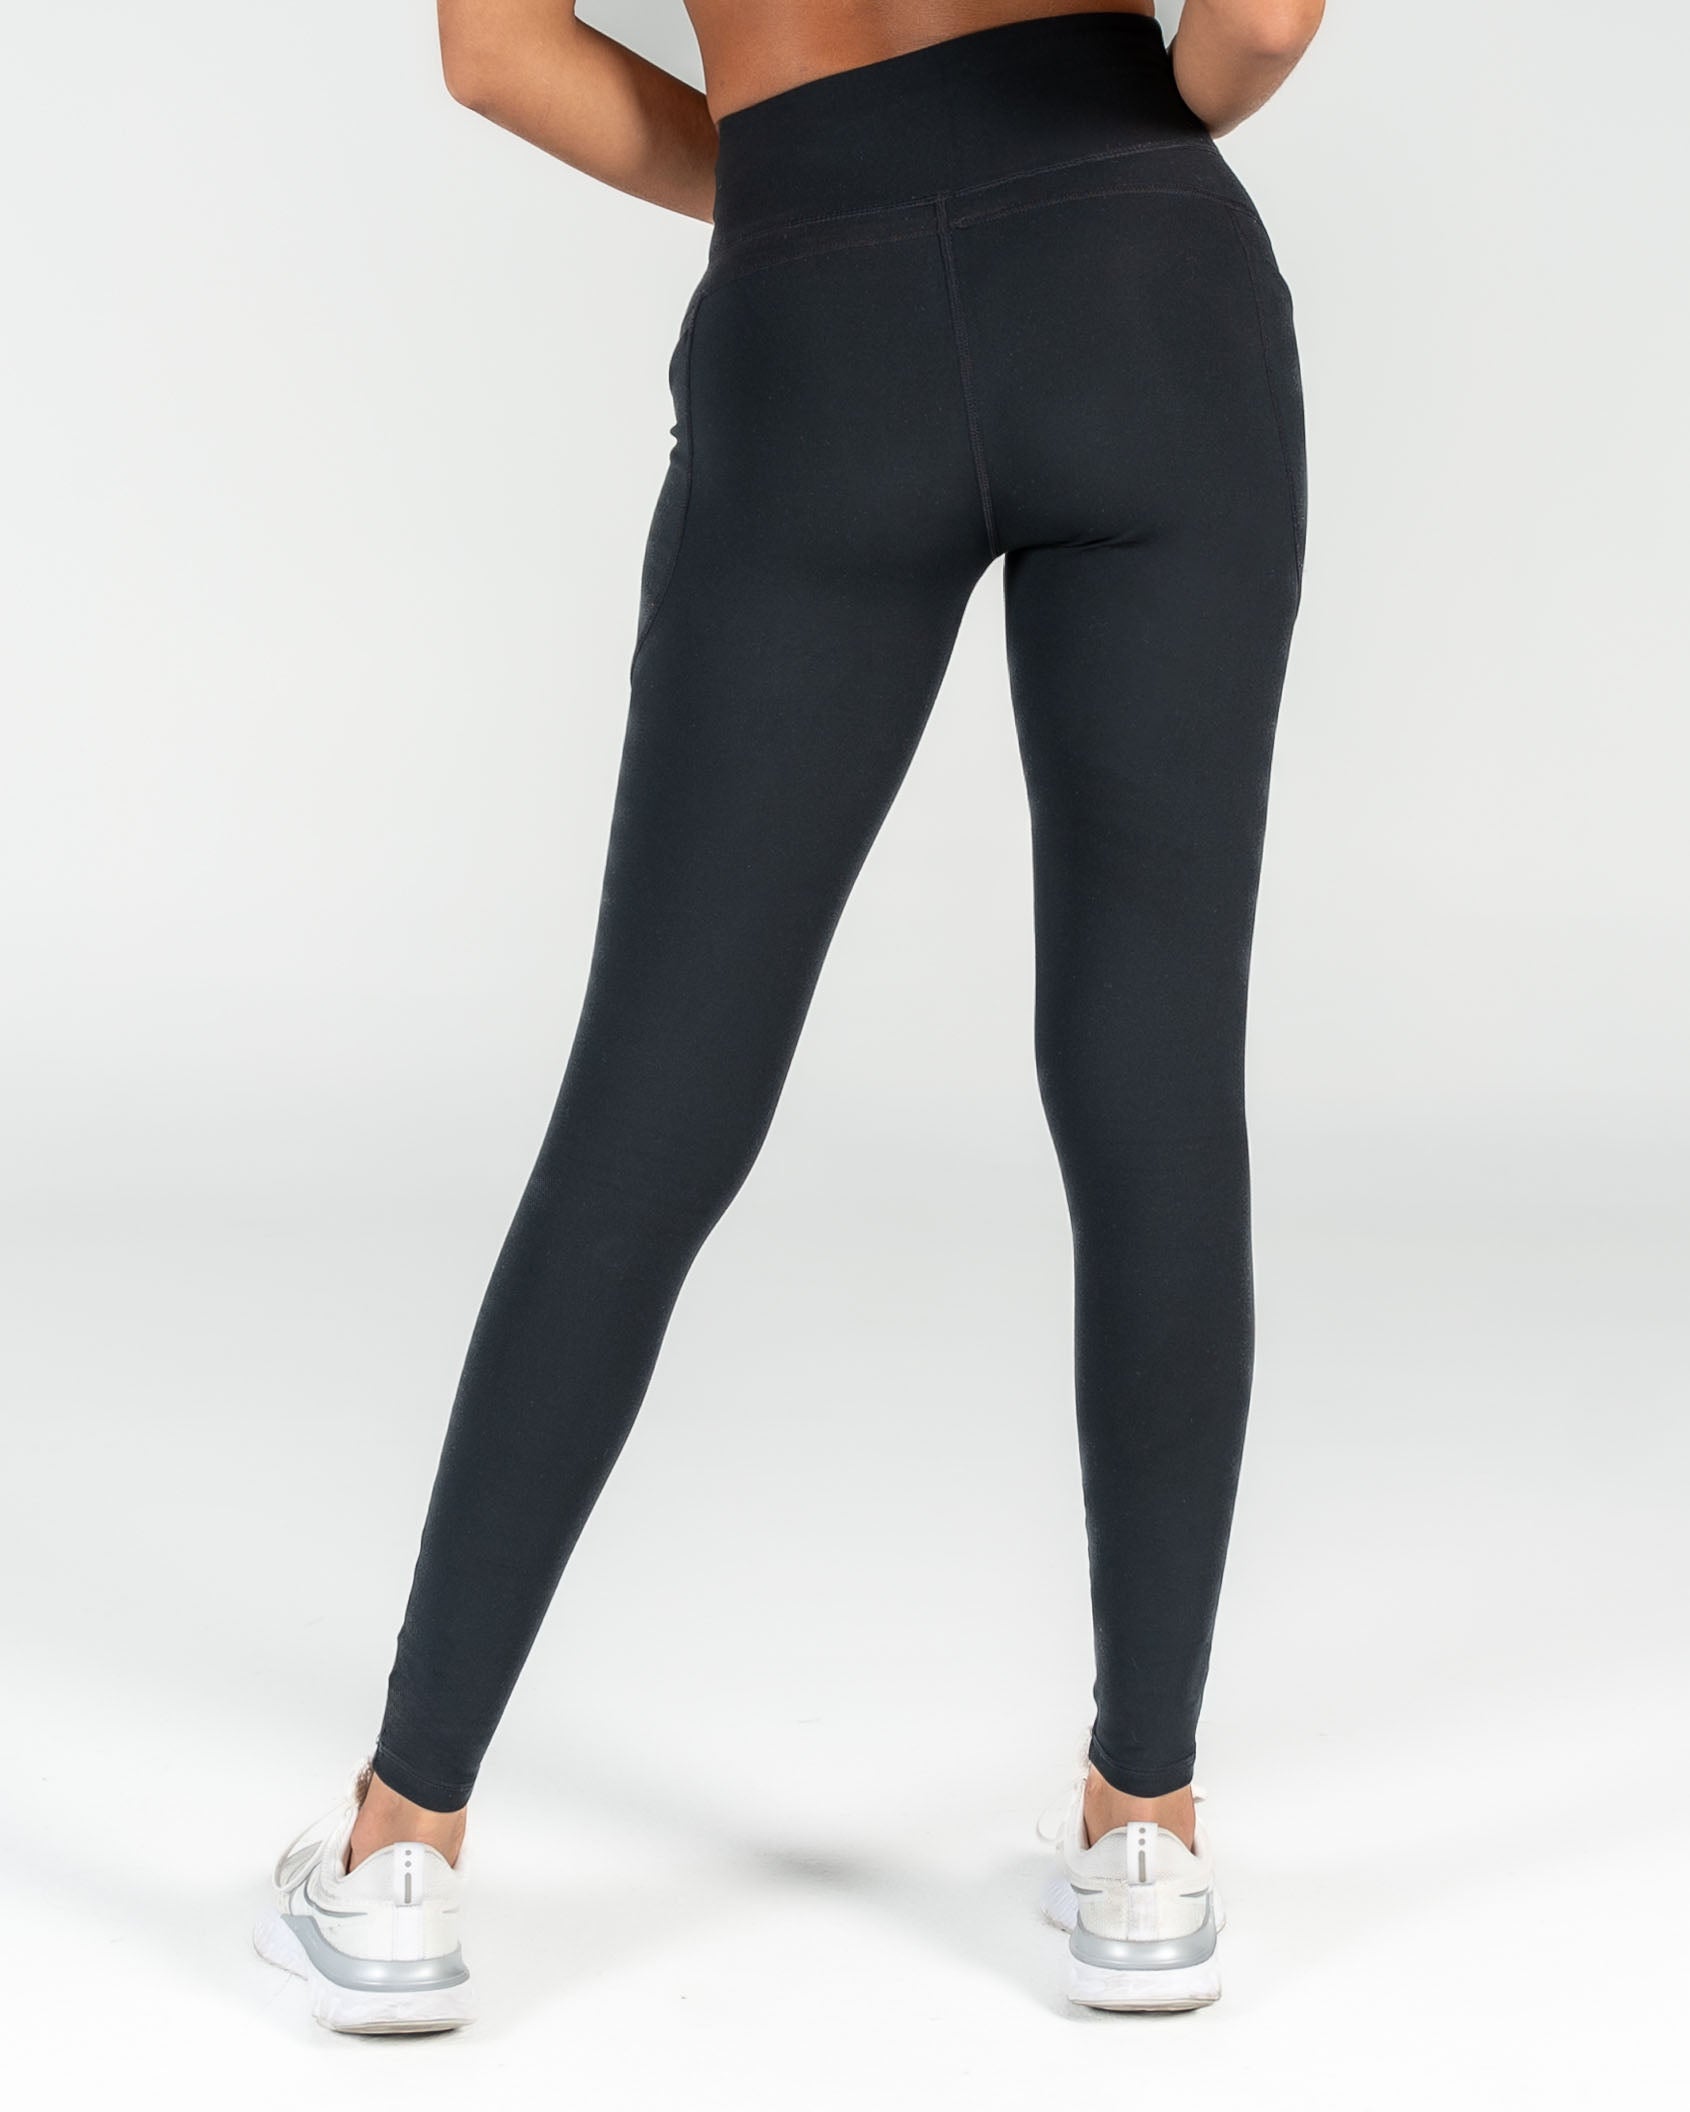 Senita Athletics - The Criss Cross Tights are baaaaack! We've made a few  adjustments and they're better than before! Sell out risk is high with  these bad boys, so snag 'em while